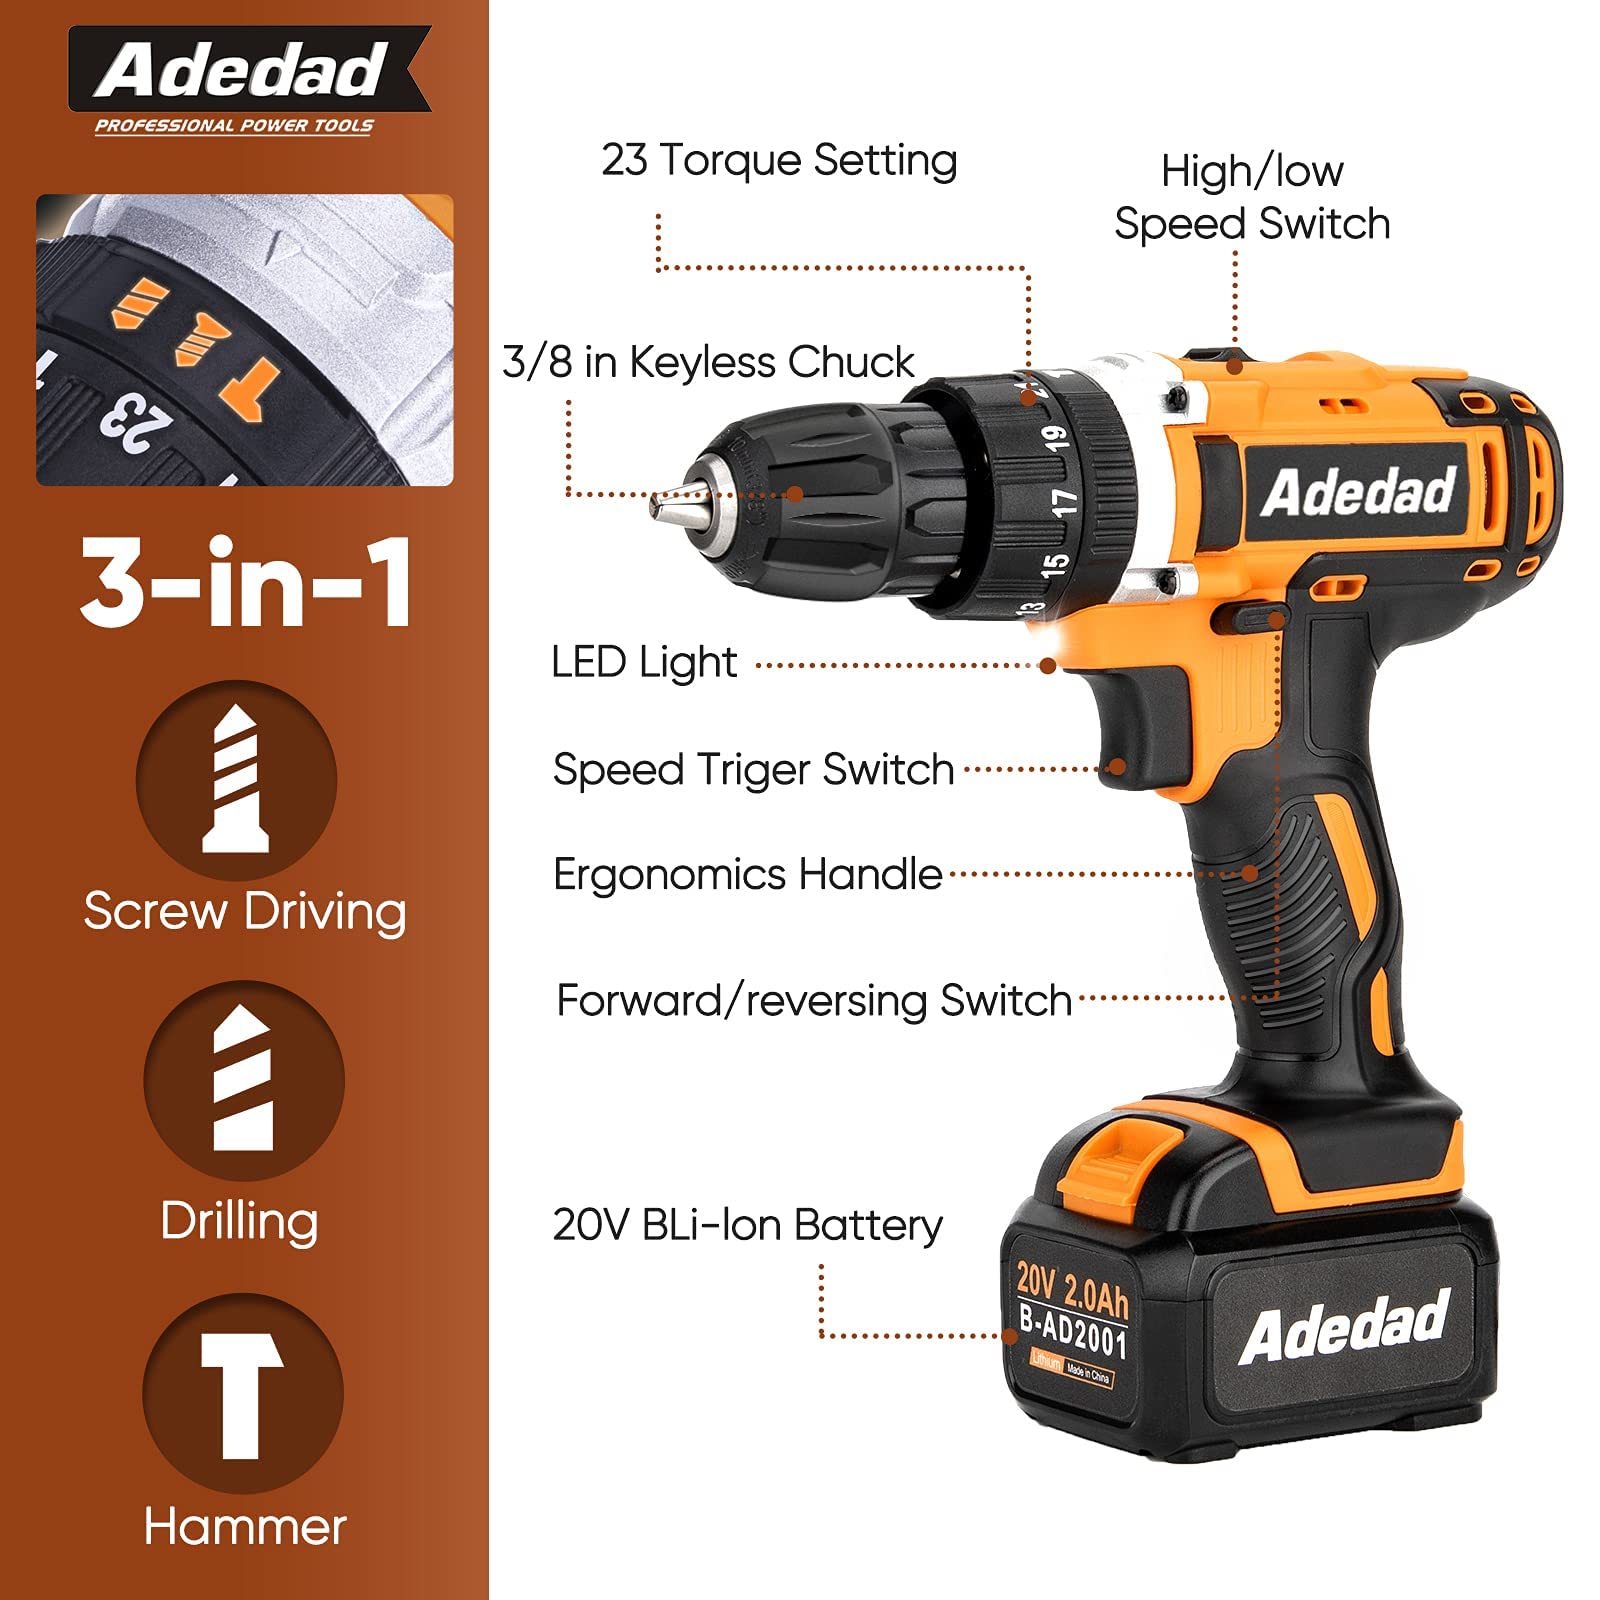 Adedad 20V Cordless Drill Set Electric Power Drill Kit with 2 Batteries and Charger,300 in-lbs Torque, 3/8 Inch Keyless Chuck, 23+1 Position,2 Variable Speed, LED Light and 48pcs Accessories